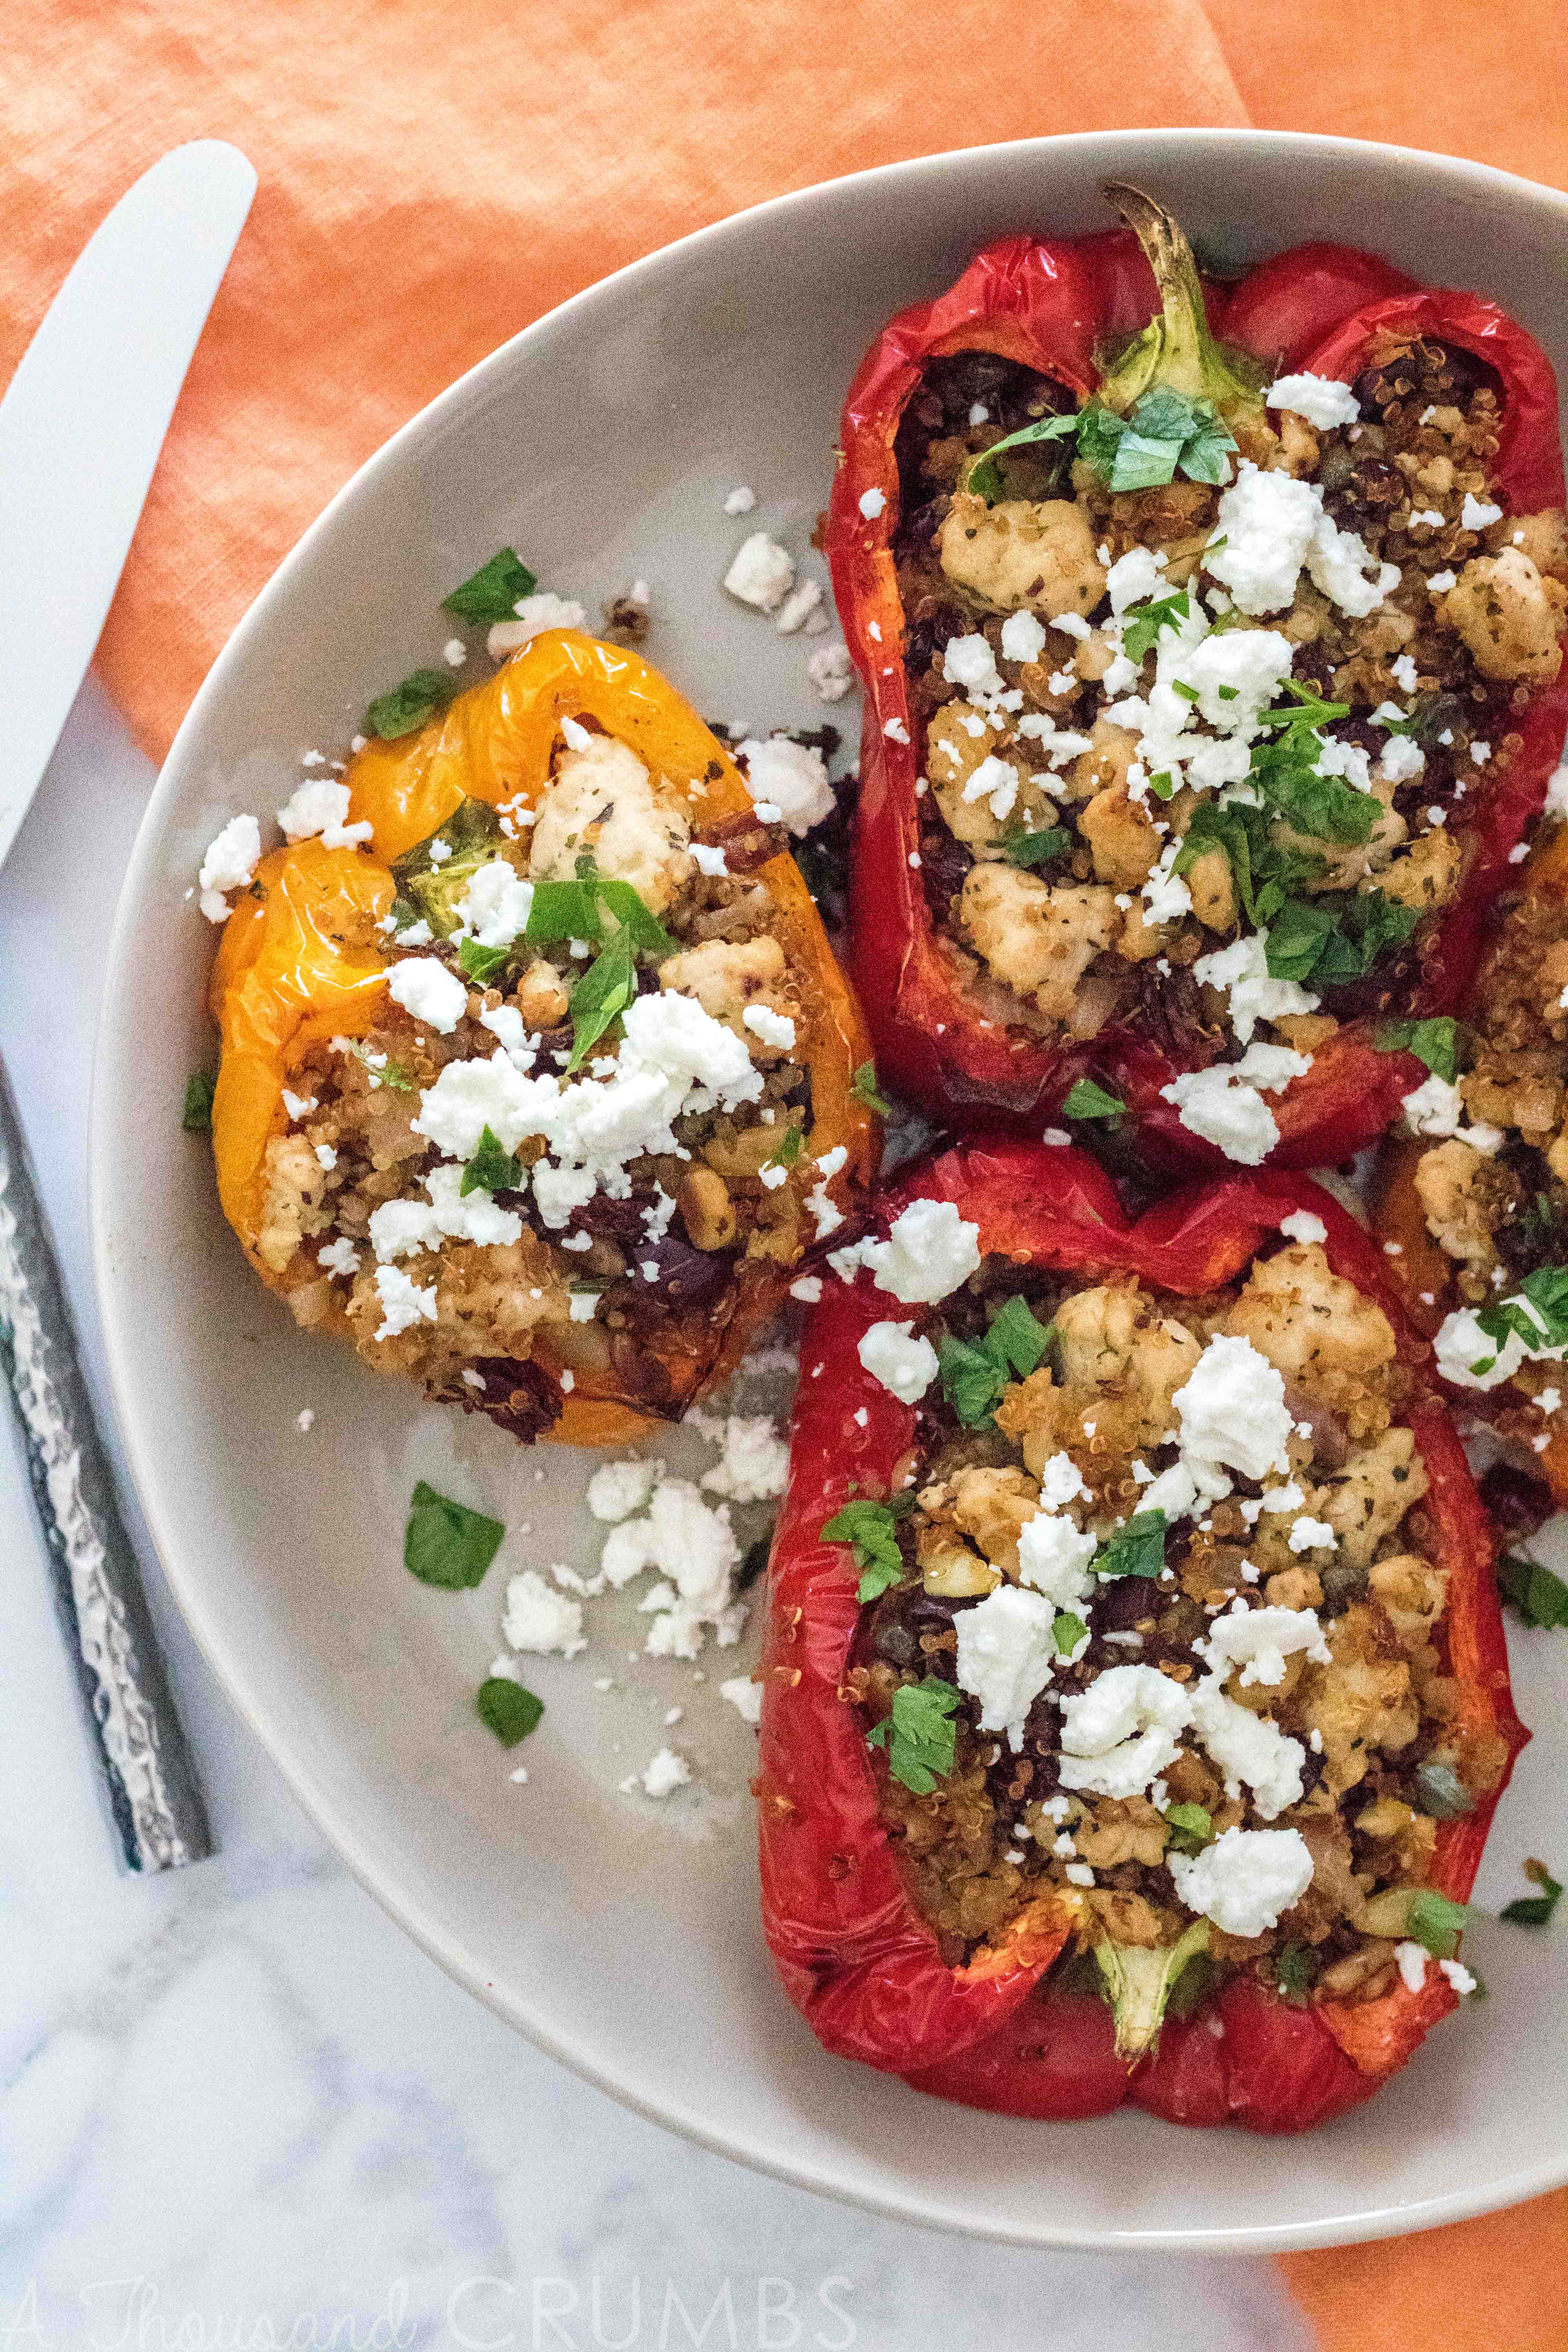 Mediterranean Turkey and Quinoa Stuffed Peppers from A Thousand Crumbs (3 of 4)